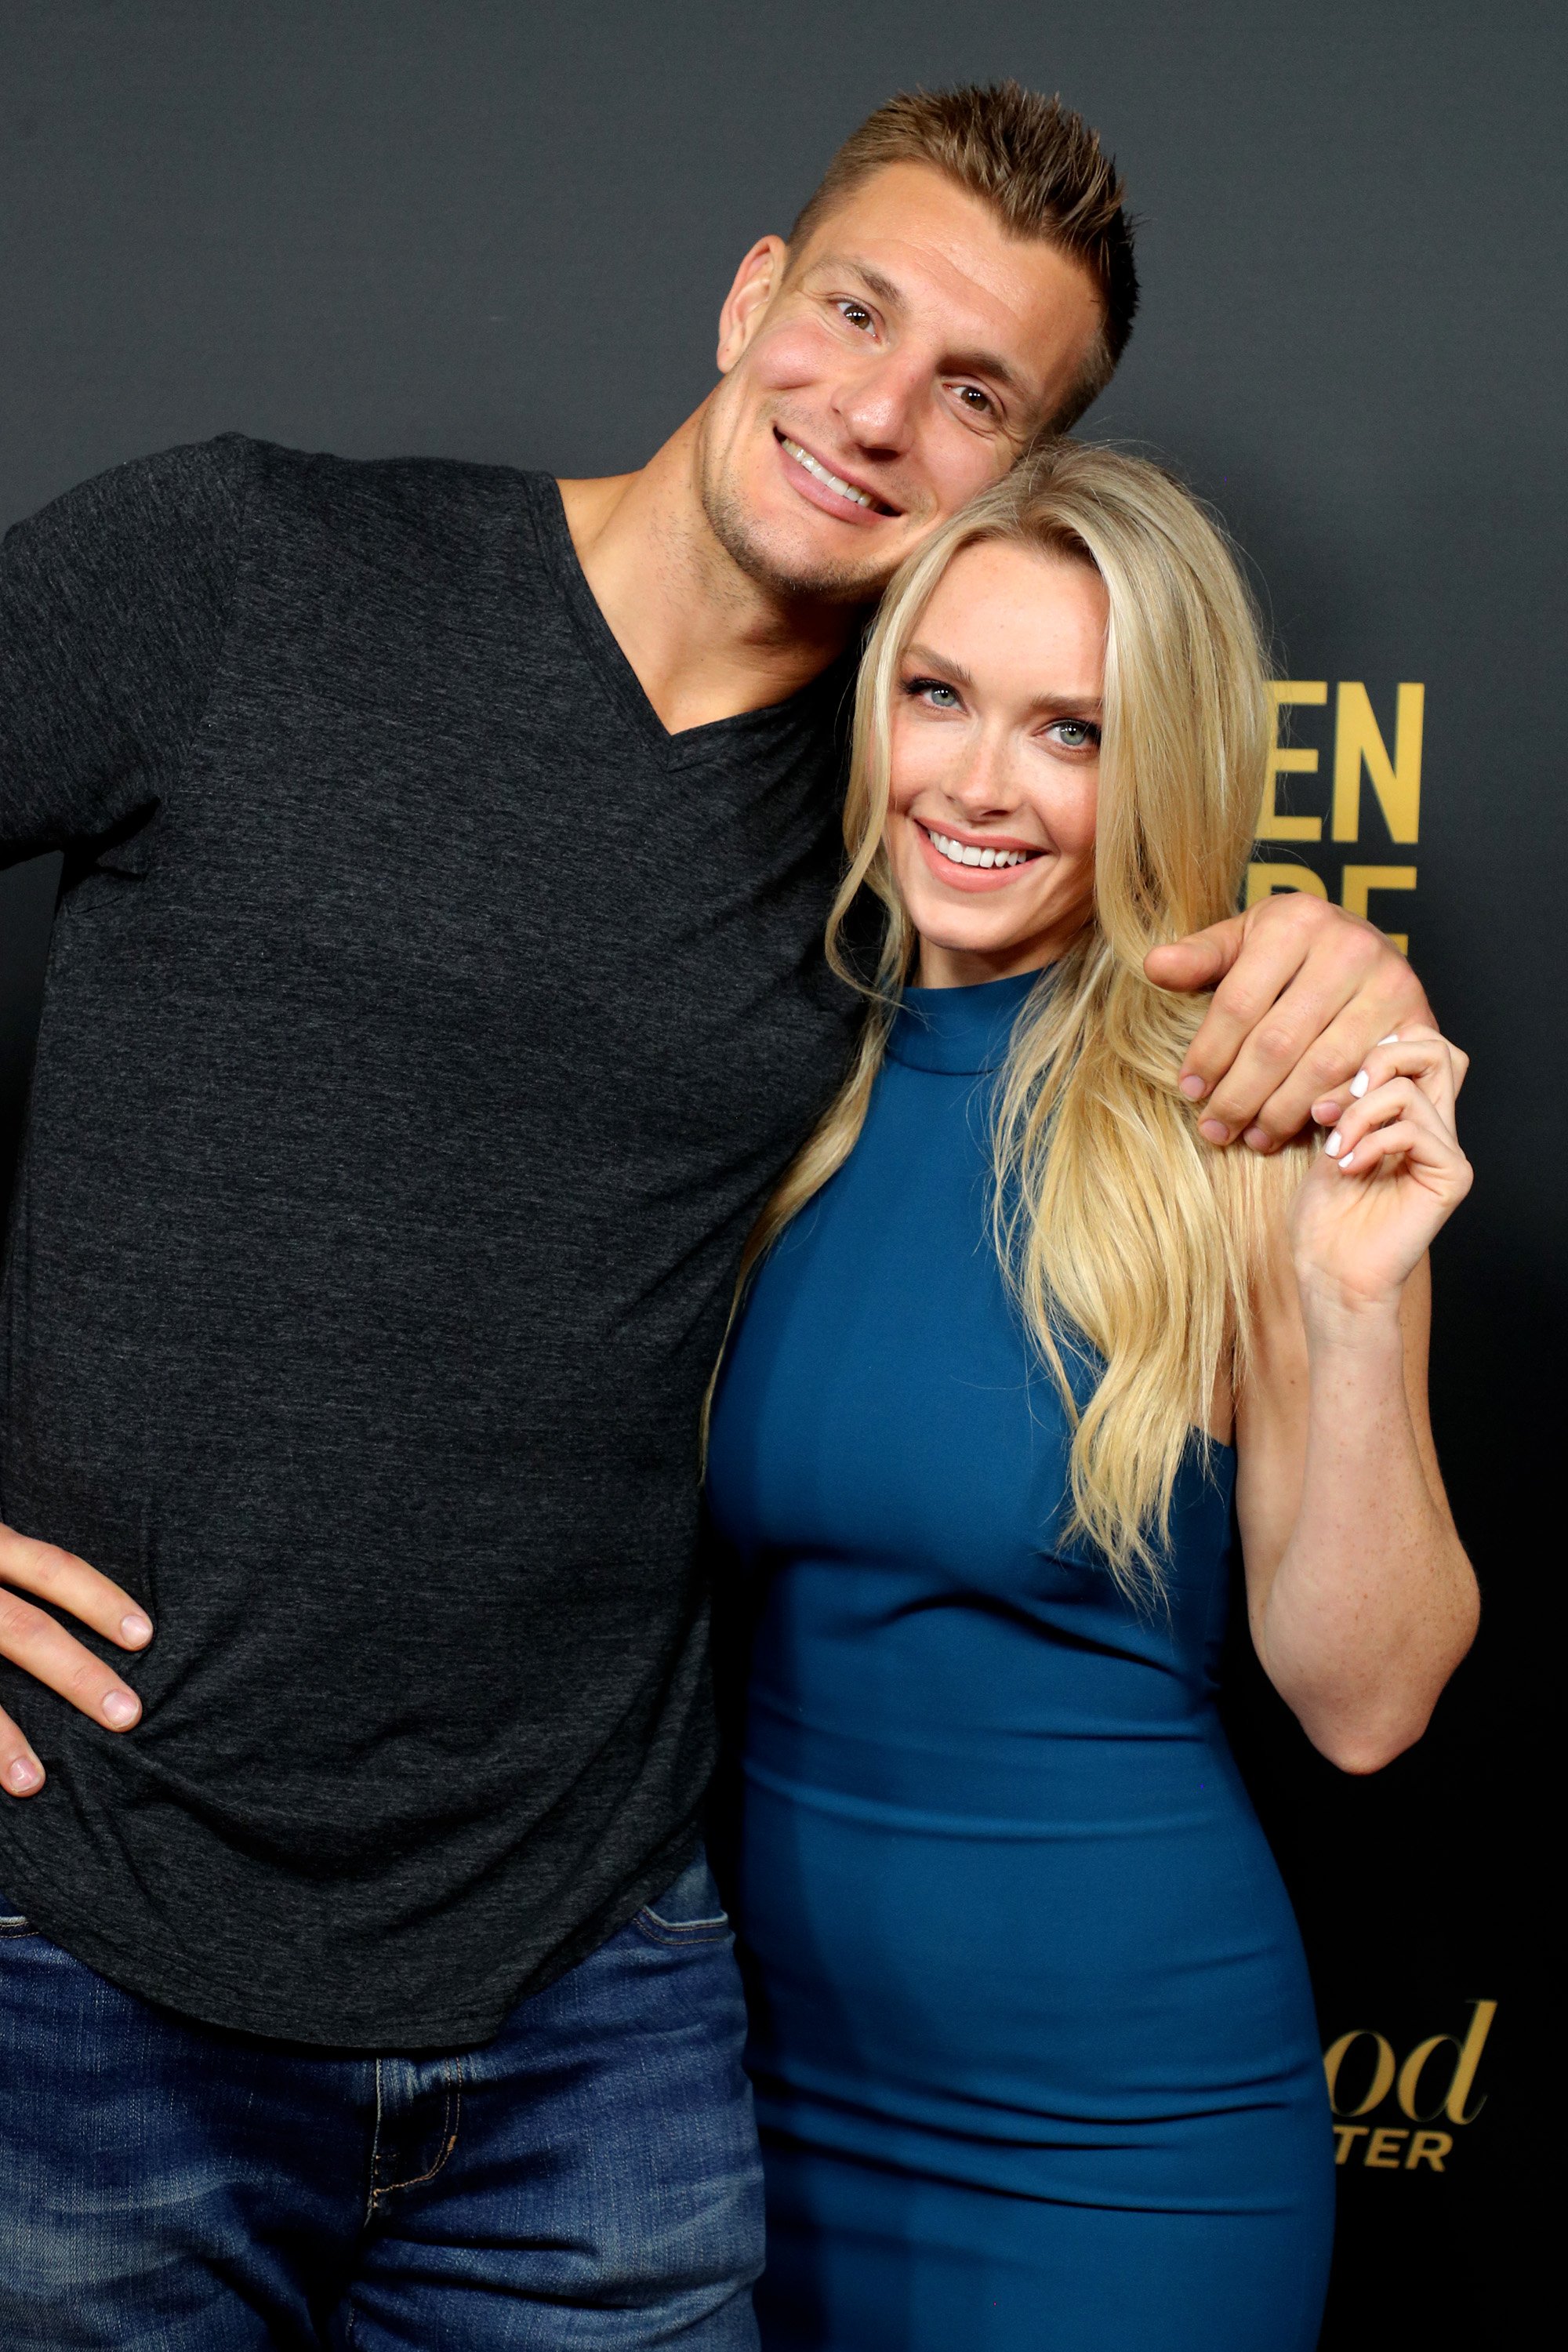 <p>Tampa Bay Buccaneers tight end Rob Gronkowski's long romance with Sports Illustrated Swimsuit Issue model Camille Kostek was sparked at a charity event. "It was November 2013 and we were at a Goodwill event. It was right before Thanksgiving. So we were filling turkey baskets for families who are less fortunate," Camille recalled in an interview on SiriusXM's "This is Happening with Mark Zito and Ryan Sampson" that aired in February 2021, as reported by Fox News. He played for the New England Patriots then, and she was a new cheerleader for the team. "He ripped off his 'Hi, my name is Rob Gronkowski' sticker on his shirt ... he had written on the back of it his phone number and then he wrote 'Shhh,' because he knew it was ... a secret." Retired tight end Jermaine Wiggins passed her the name tag. "I was a rookie [cheerleader] and I was so scared. I was like, 'Oh no, no, no, I can't take this. I can't take his number.' And then [Jermaine] was like, 'Just take it,' and I was like, 'OK,' and I put it in my pocket," she recalled. "I didn't make it locker room talk. I never spoke about it." Several days later, she FaceTimed Gronk "and I put my phone down and I like, looked away from it. And then he answered it and he didn't look either. I was like, 'Hello.' He was like, 'Who is this? You called me.' And I was like, 'Um, who's this?' I could tell it was his voice and he like, peeked his head over." Camille added, "He had just gotten back from a Texans game so he had like, a suit on and everything. And he was like, 'Hello?' And I was like, 'It's Camille.' And he was beaming. 'He was like, Oh my God, I never thought you'd call me.'" The rest is history!</p>